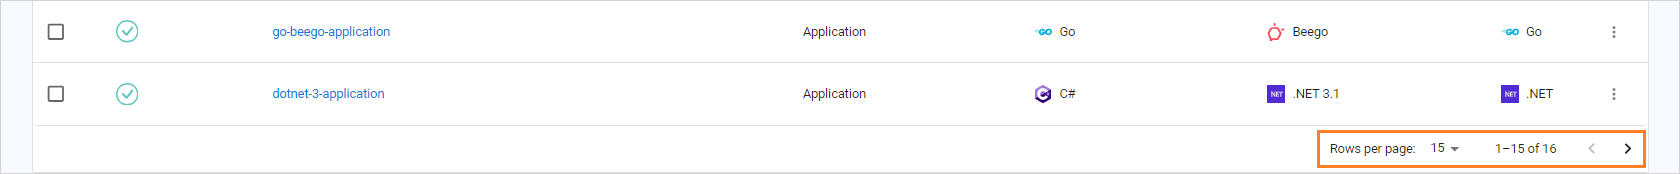 Applications pages